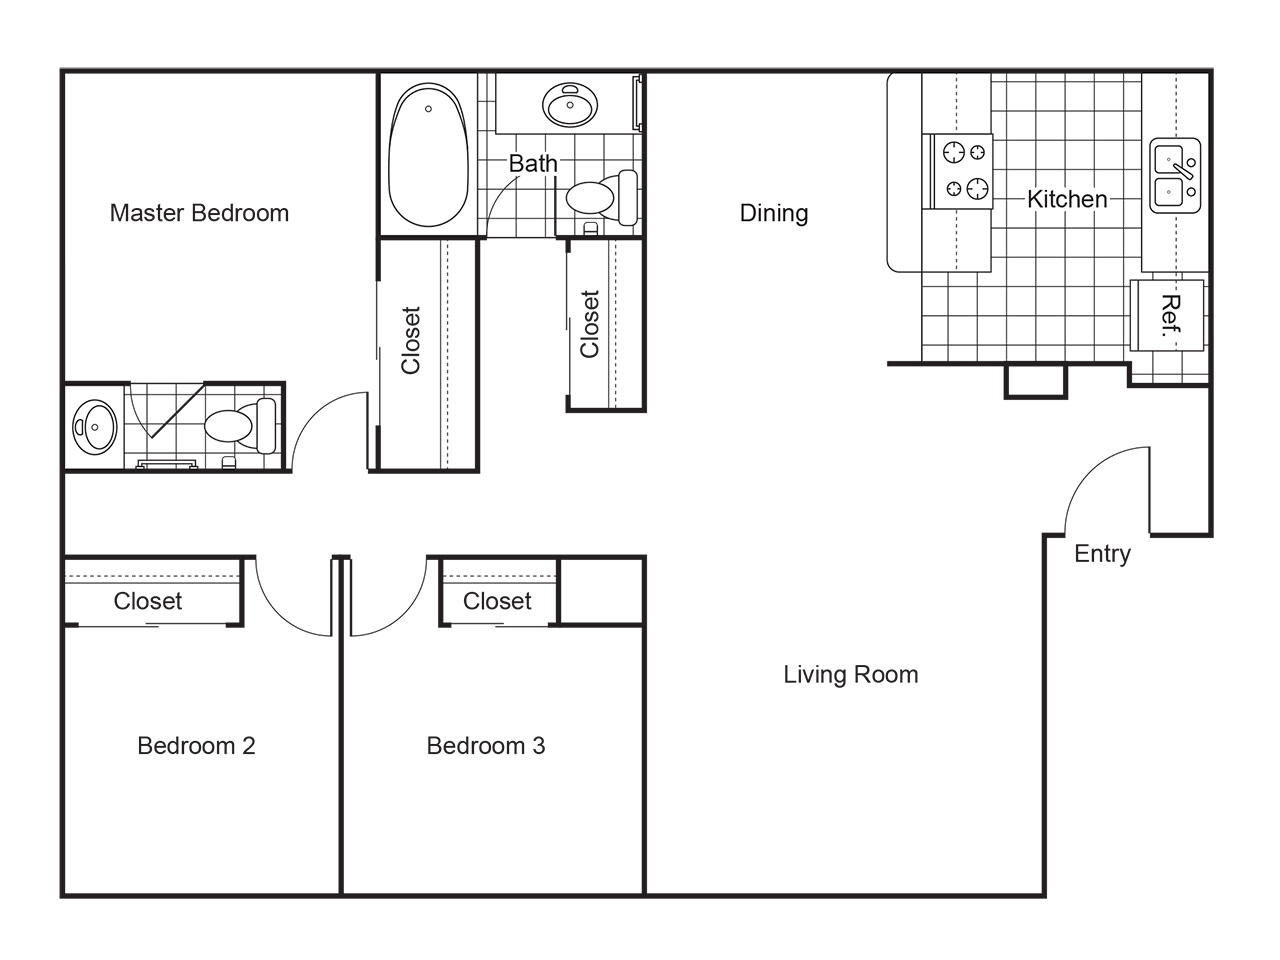 Apartment plan showing a master bedroom with a half bath, two bedrooms, a bathroom, a living room and a combination kitchen and dining area